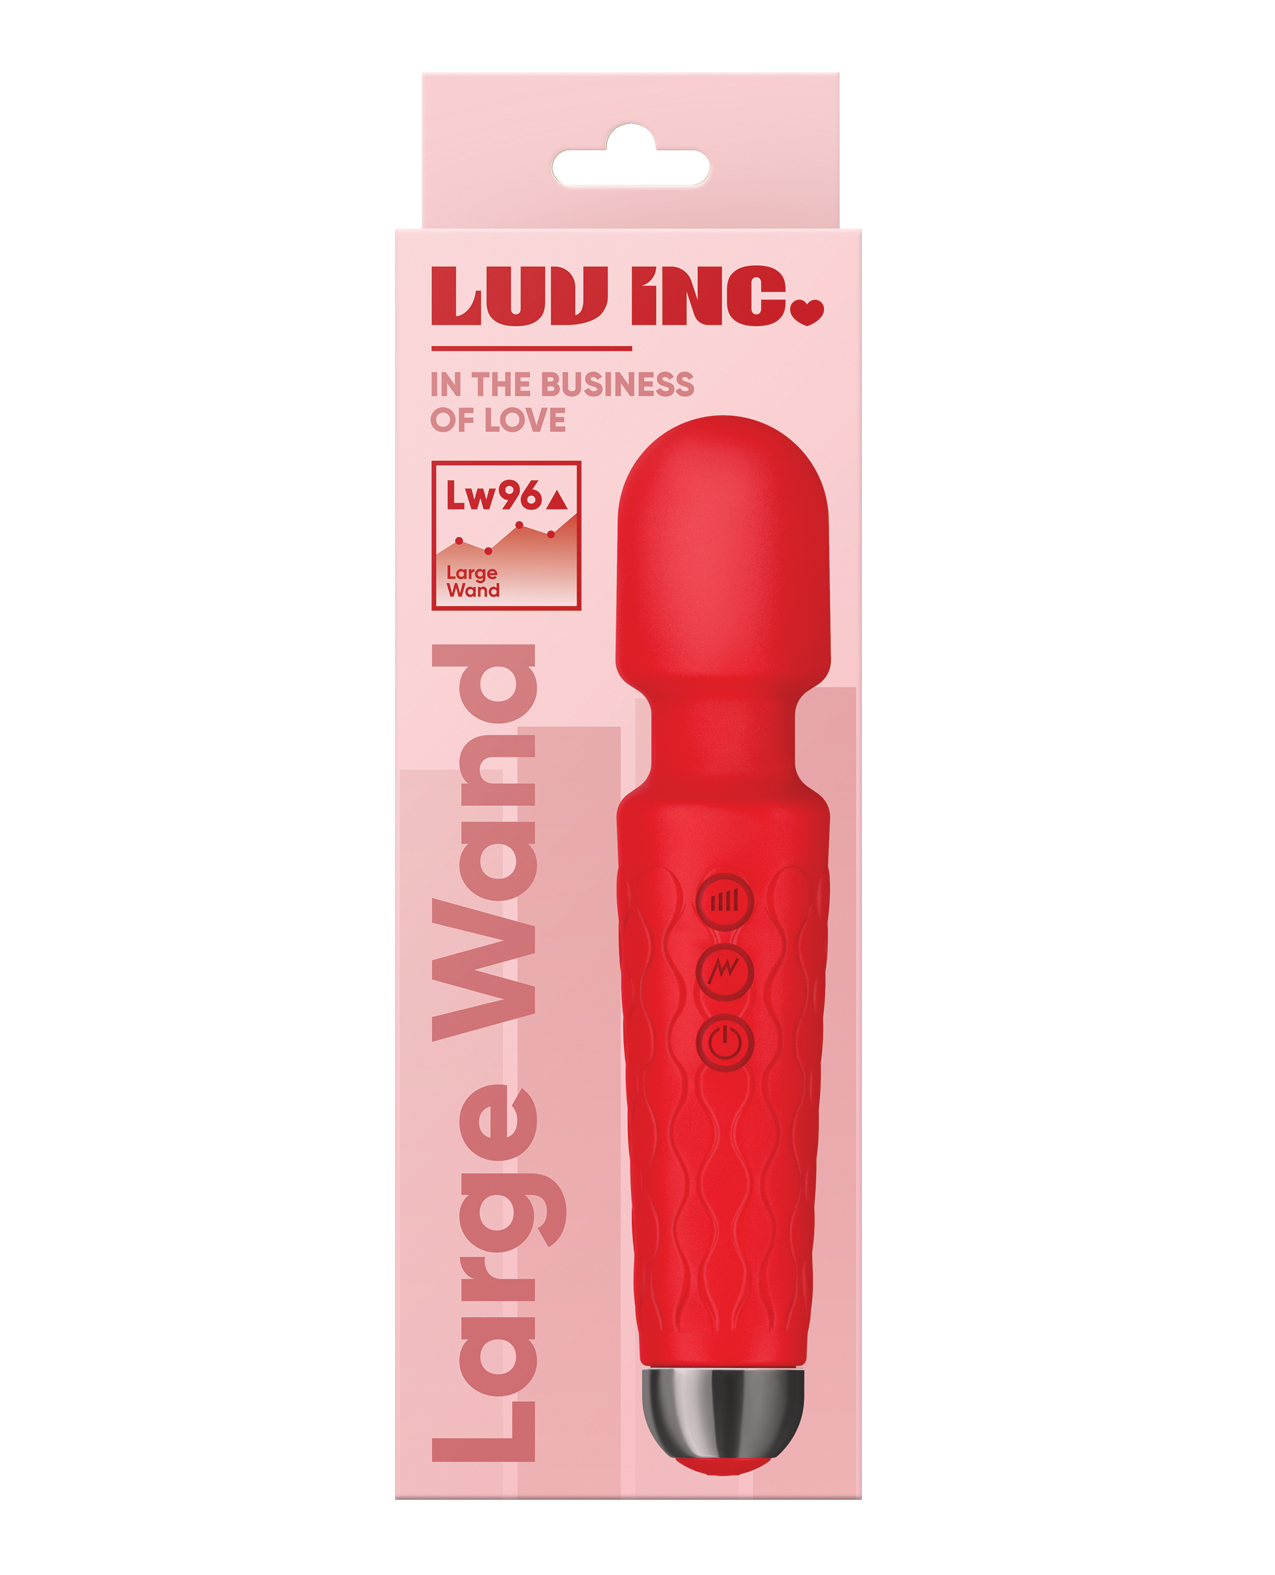 8" Body Massager in red on a pink box